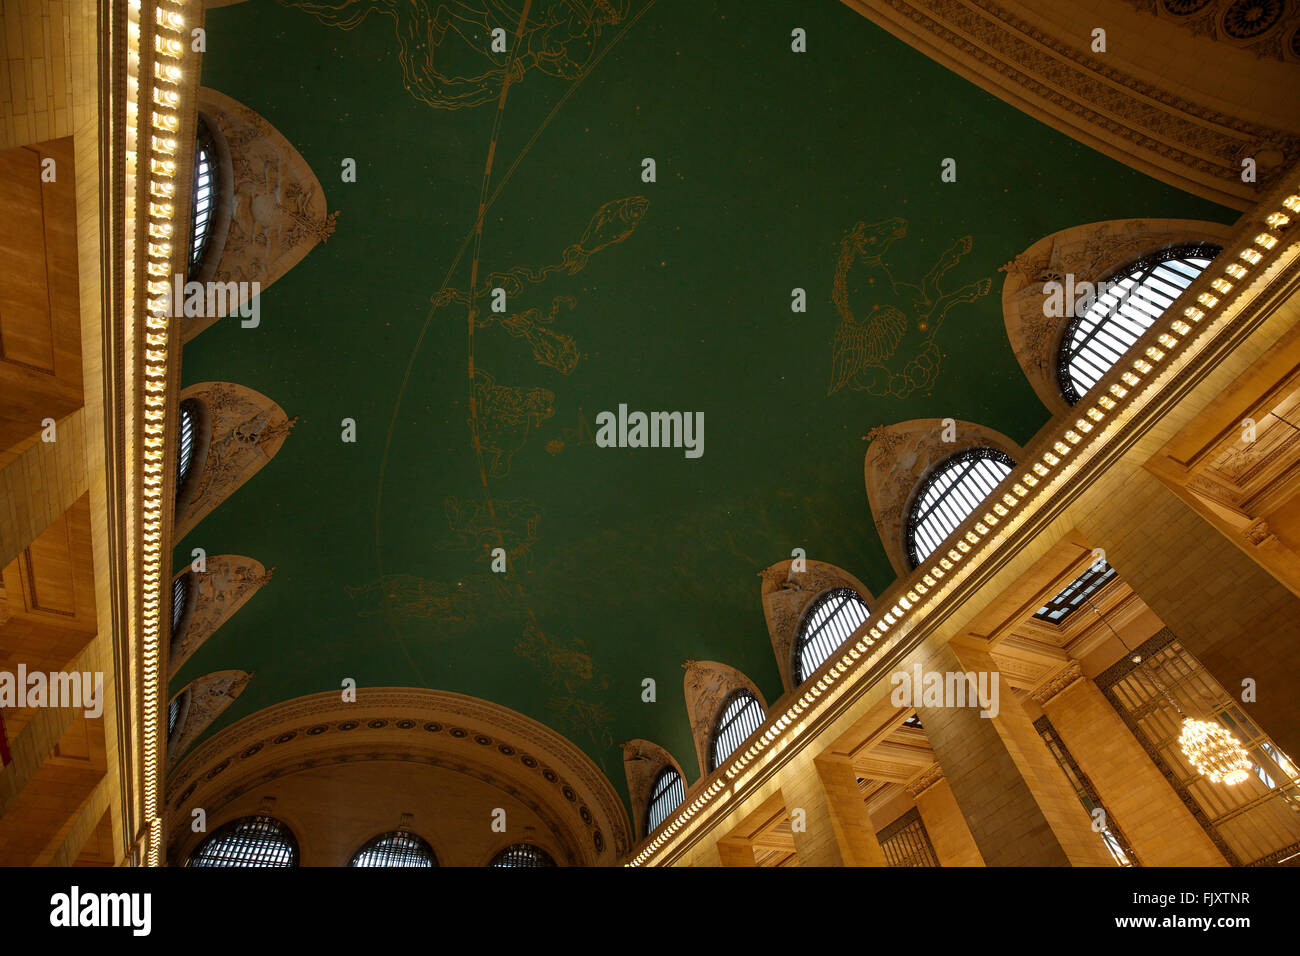 Ceiling With Constellations In Grand Central Station New